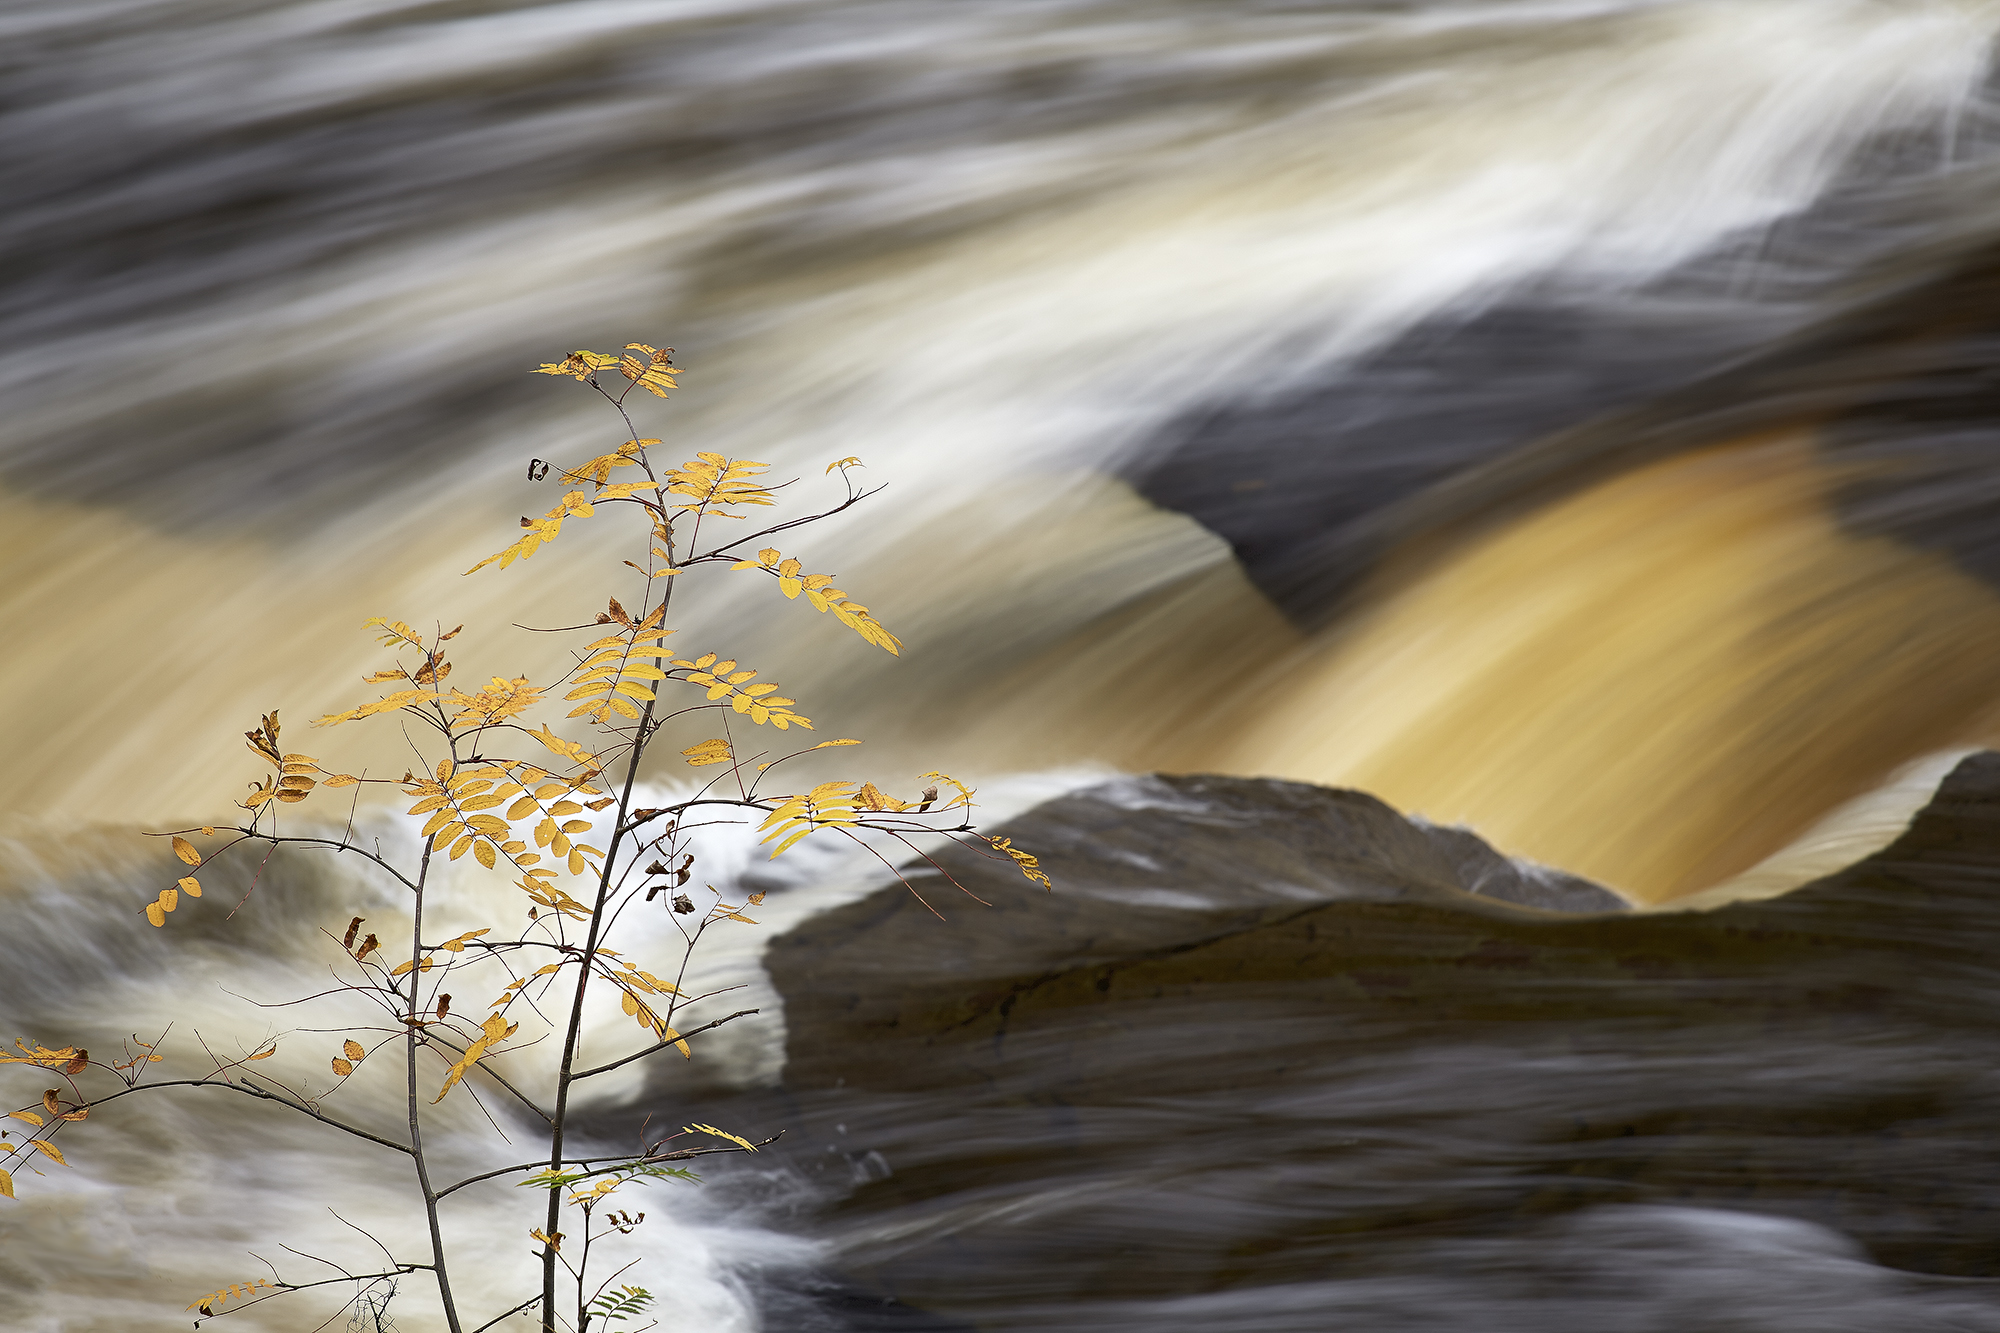 A branch sits in the foreground as rapids move quickly in the background with several colors colliding.